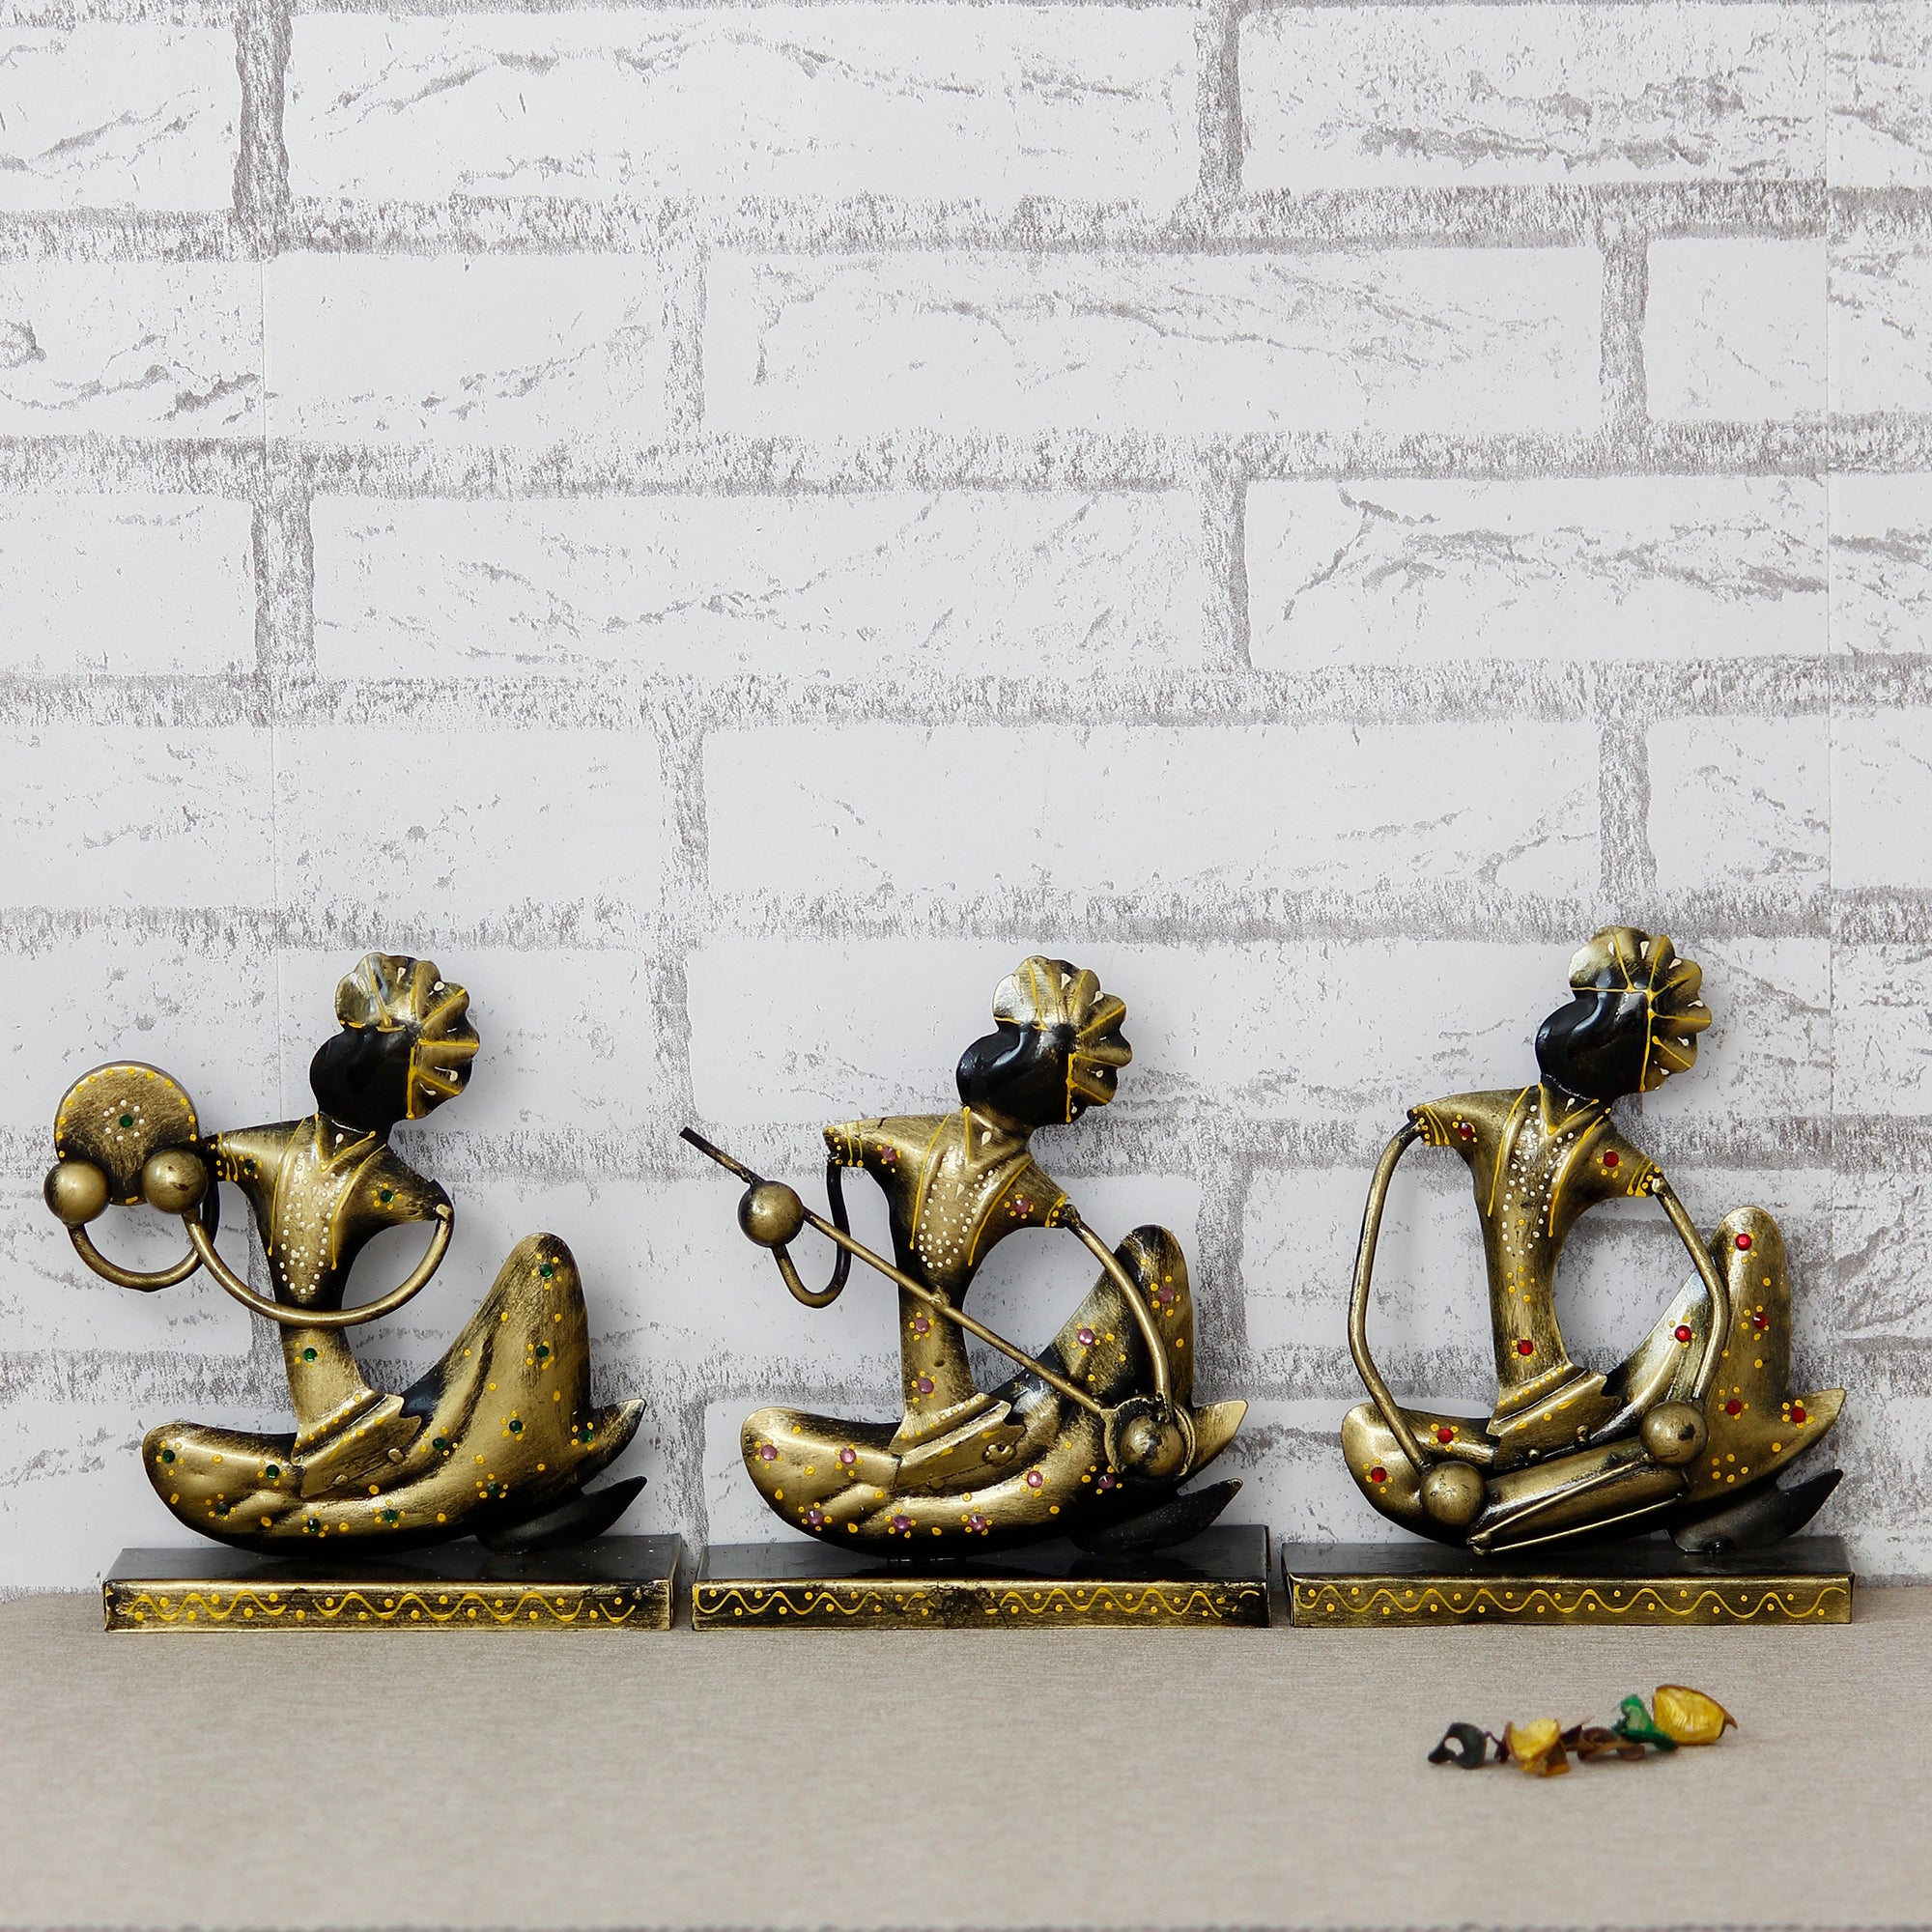 Iron Set of 3 Tribal Man Figurines with Paghdi Playing Tambourine/Dafli, Banjo, Dholak Musical Instruments Decorative Showpiece (Golden and Black) 1